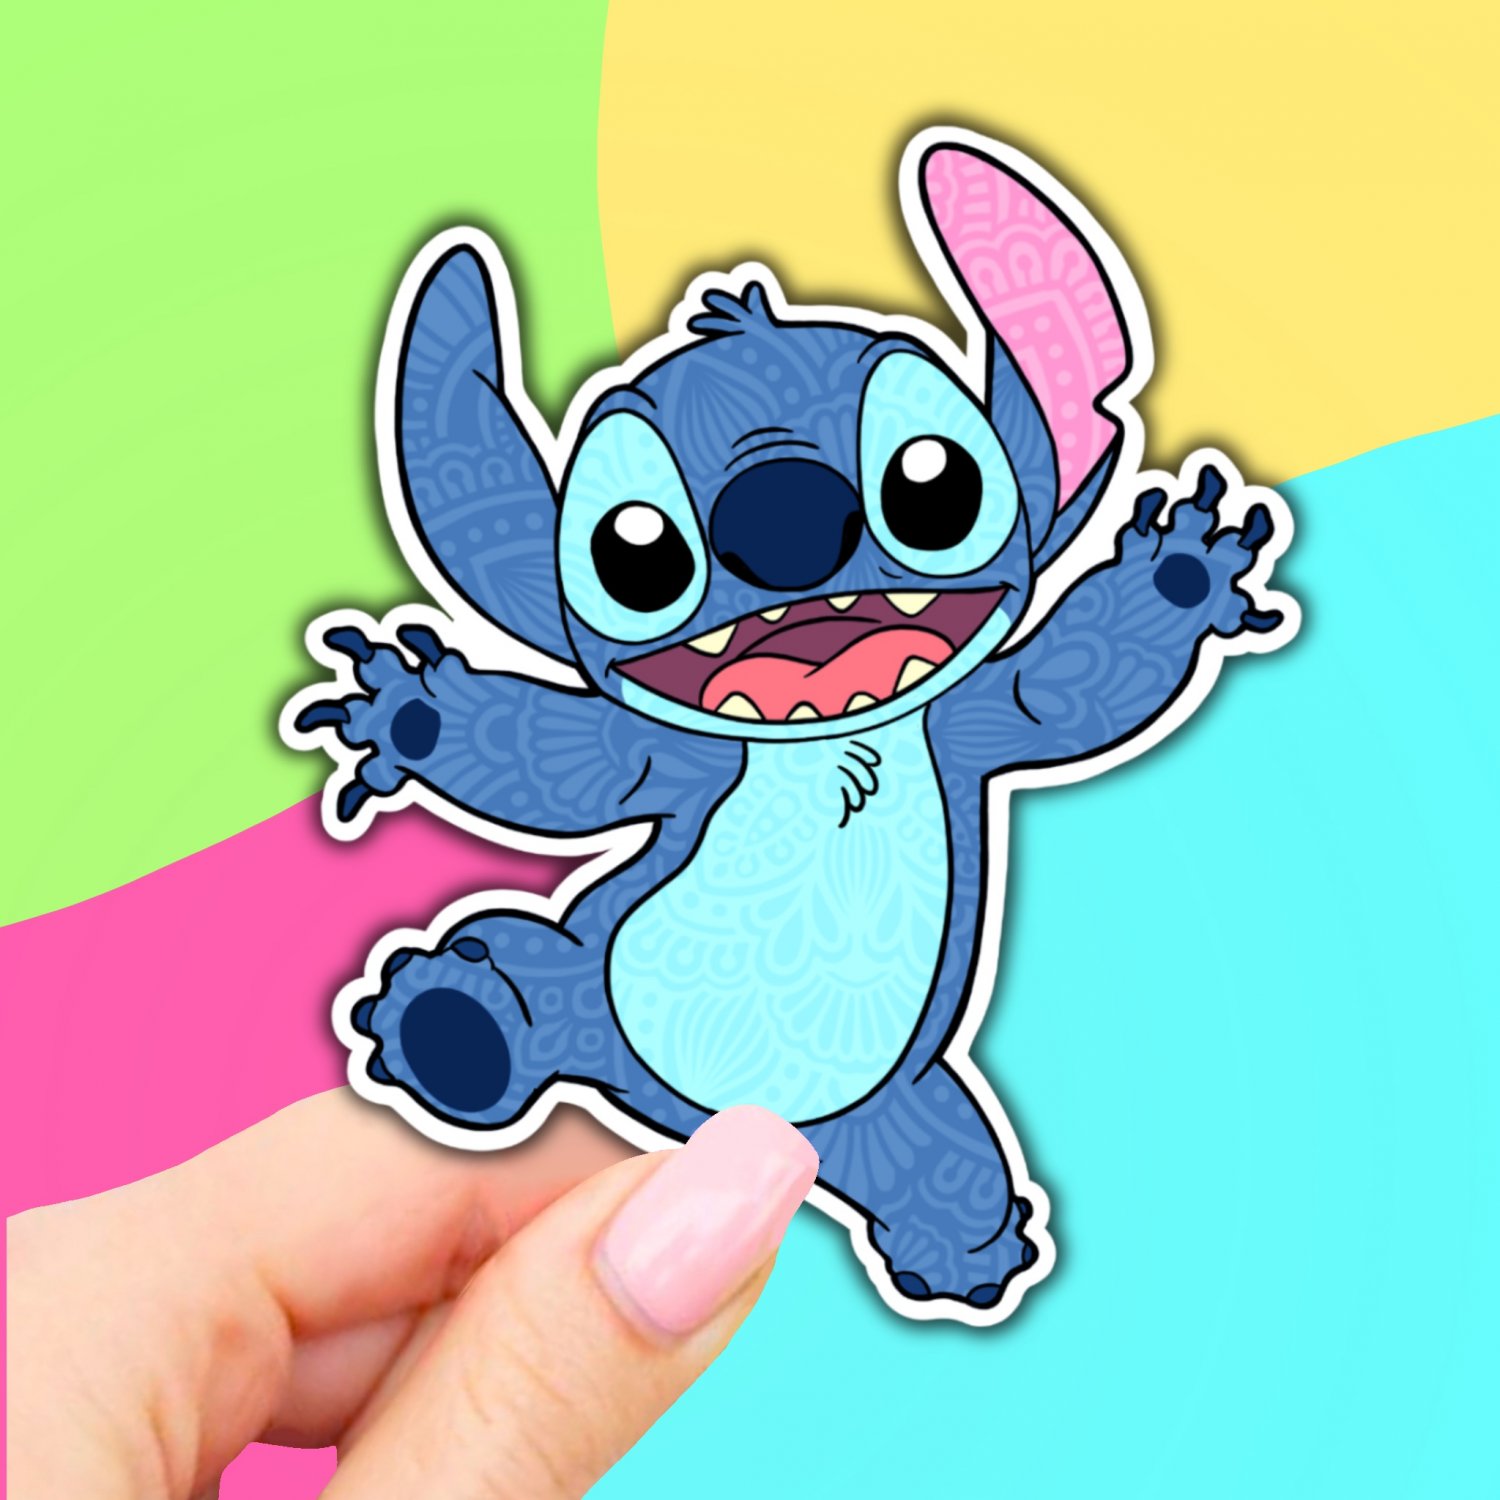 Lilo and stitch Stickers, Vinyl Stickers, Aesthetic stickers, car decal,  water bottle sticker